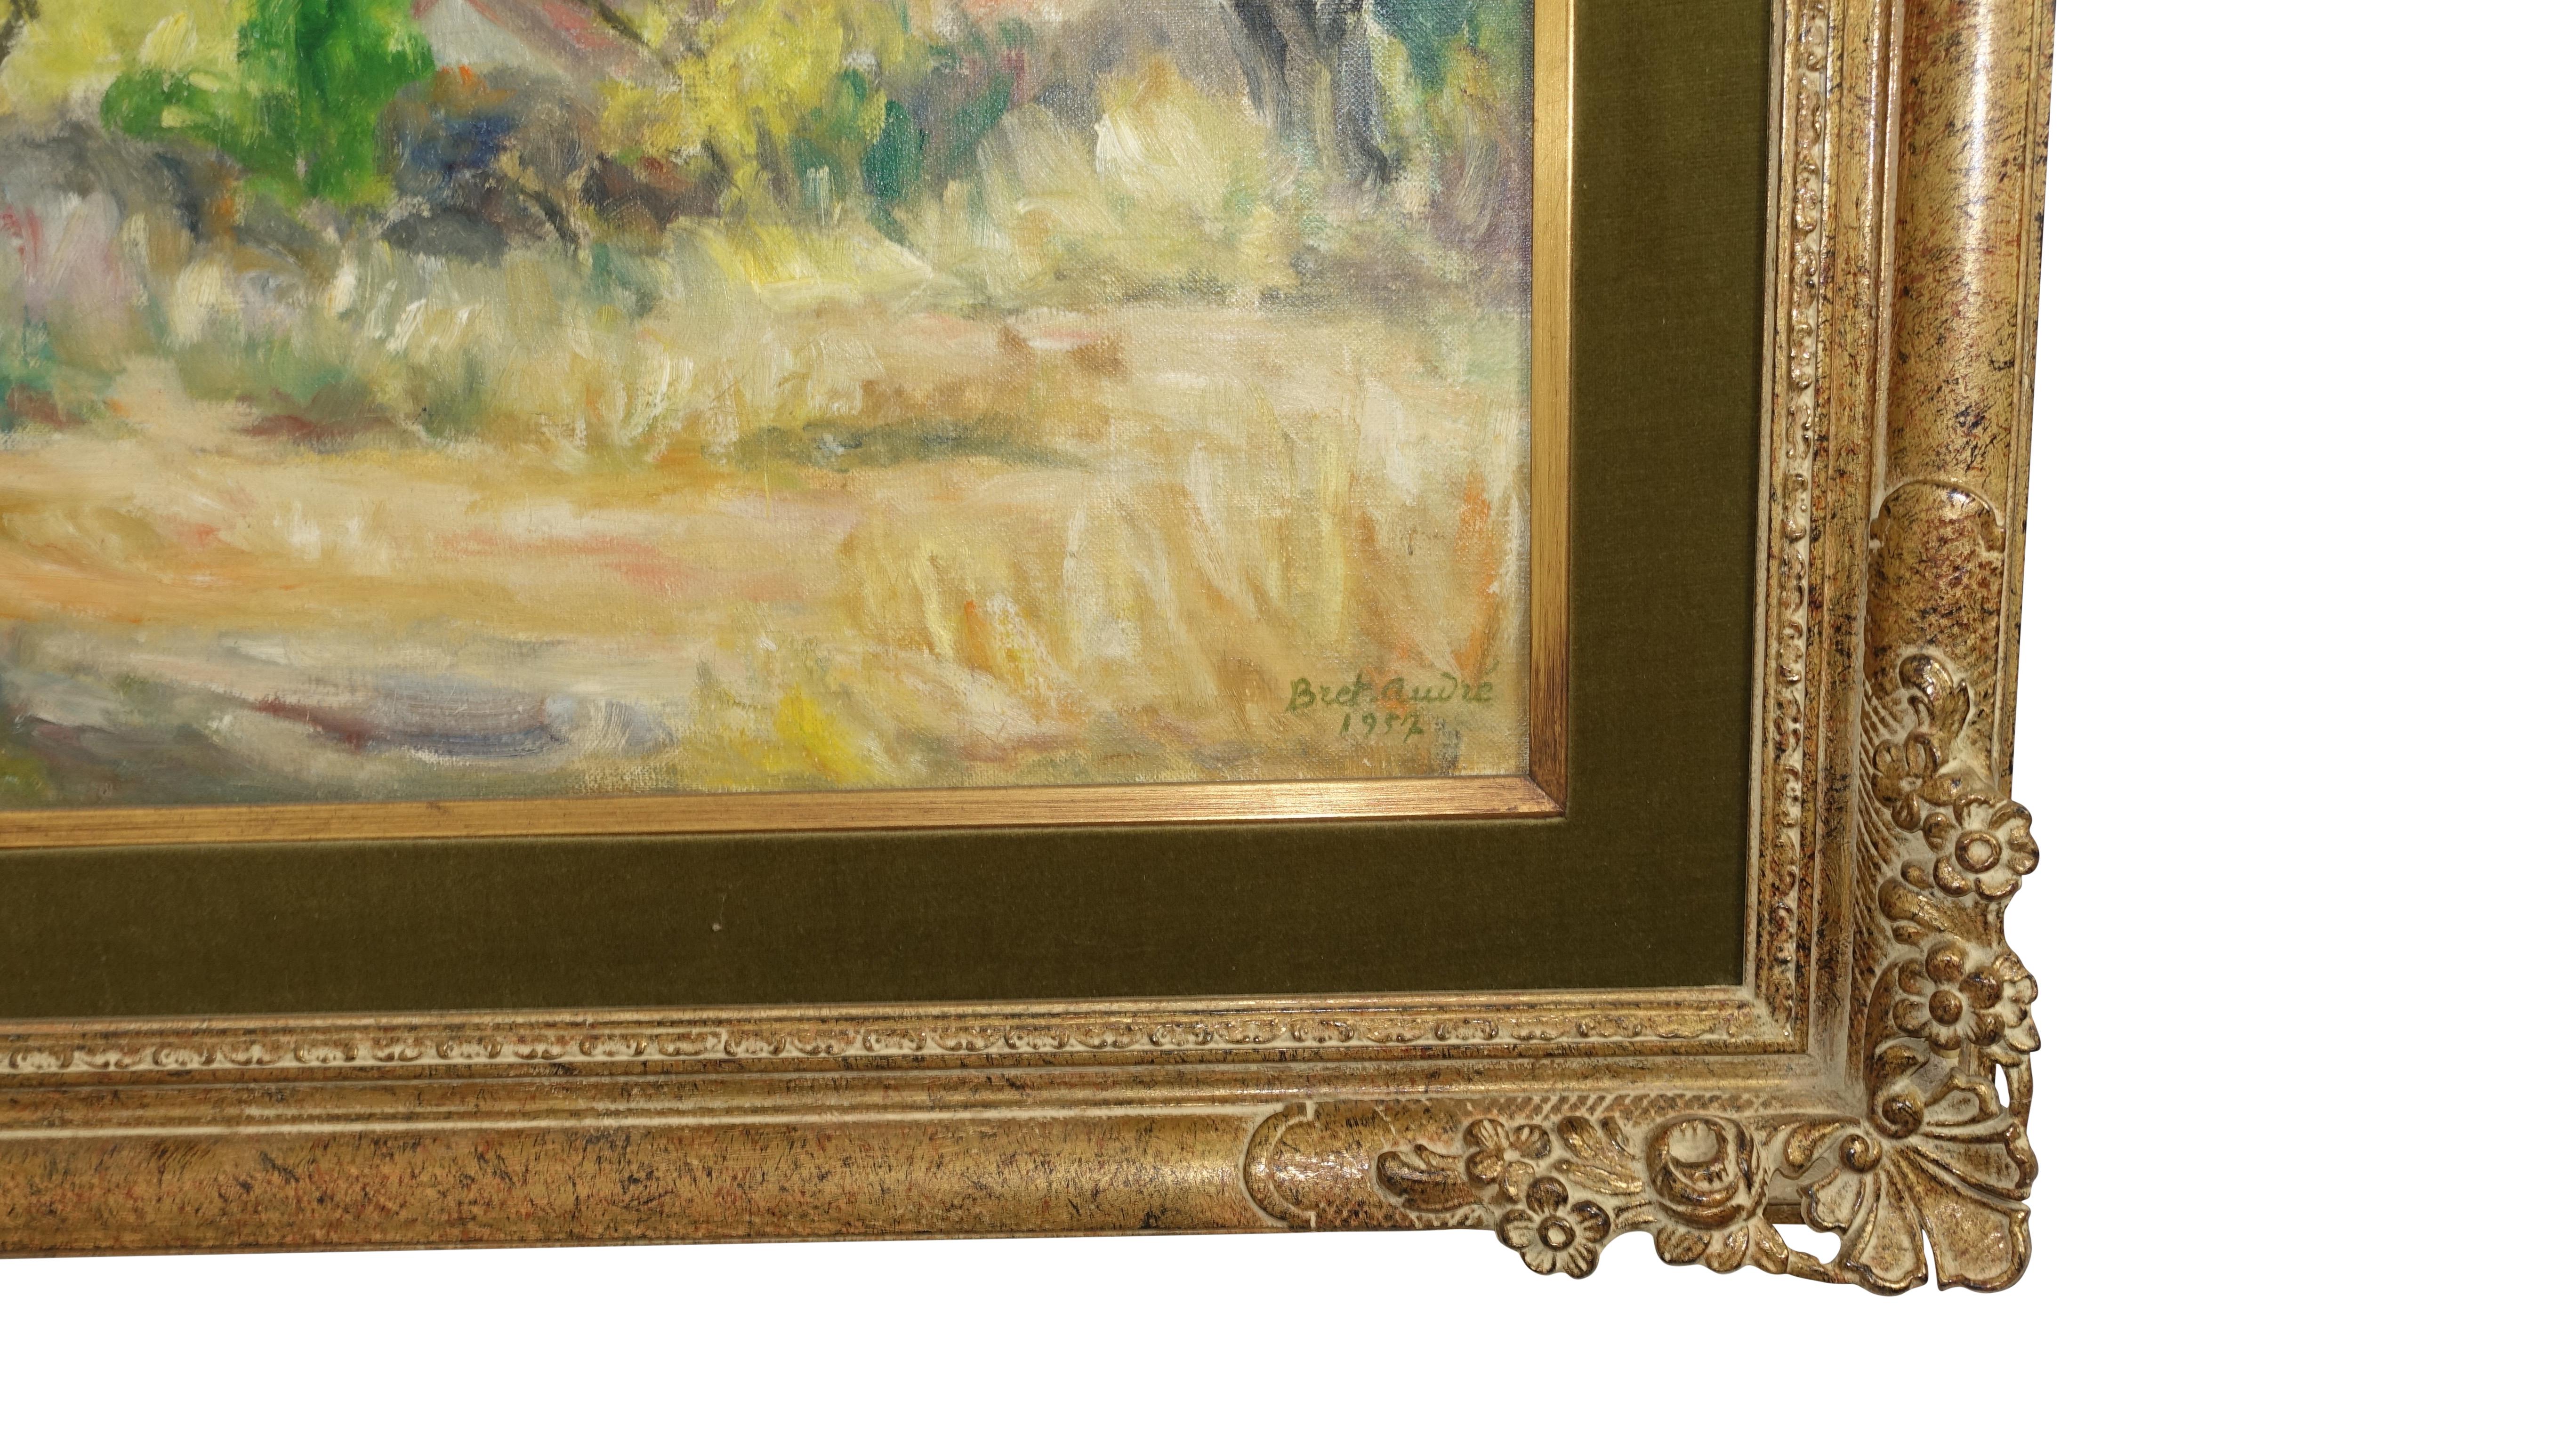 20th Century French Impressionist Landscape Painting, Signed Bret Andre, 1952 For Sale